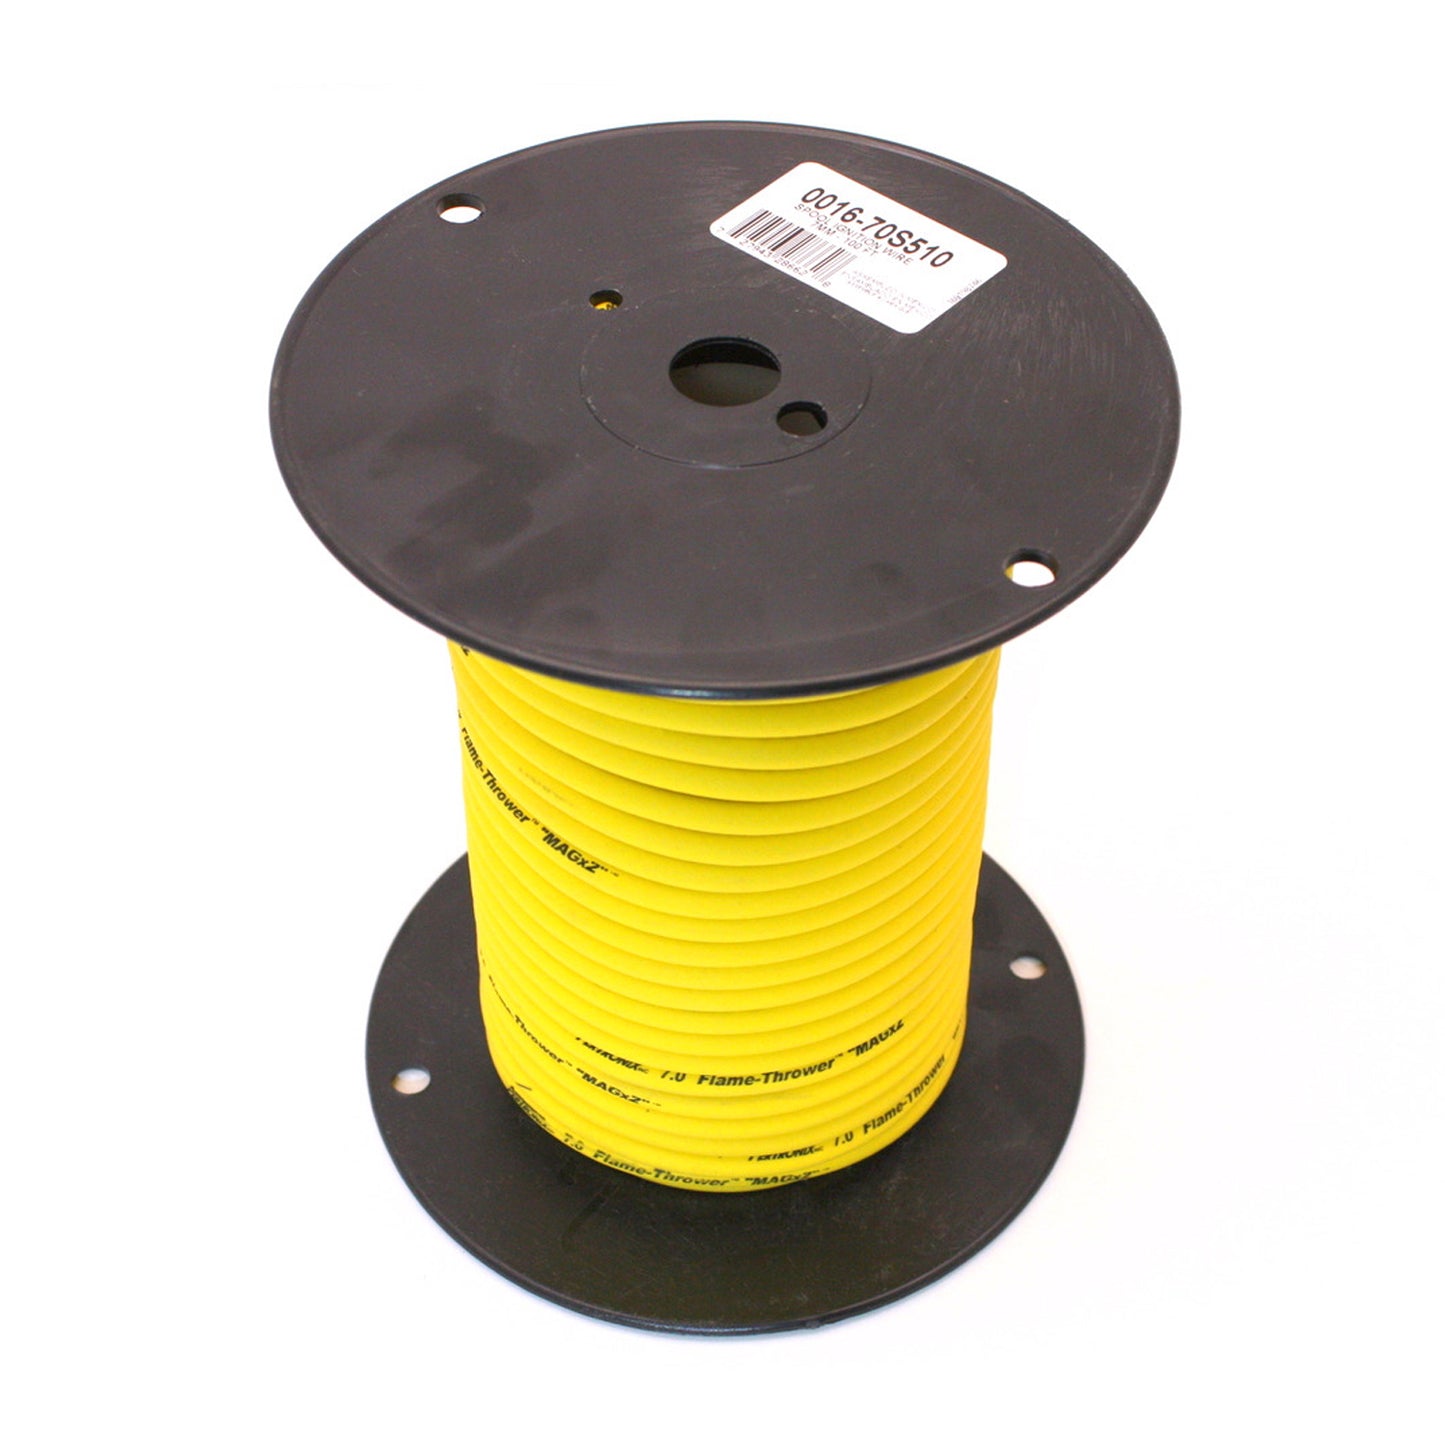 PerTronix 70S510 Flame-Thrower Spark Plug Wire 7mm Yellow with Black Script 100 Foot Spool